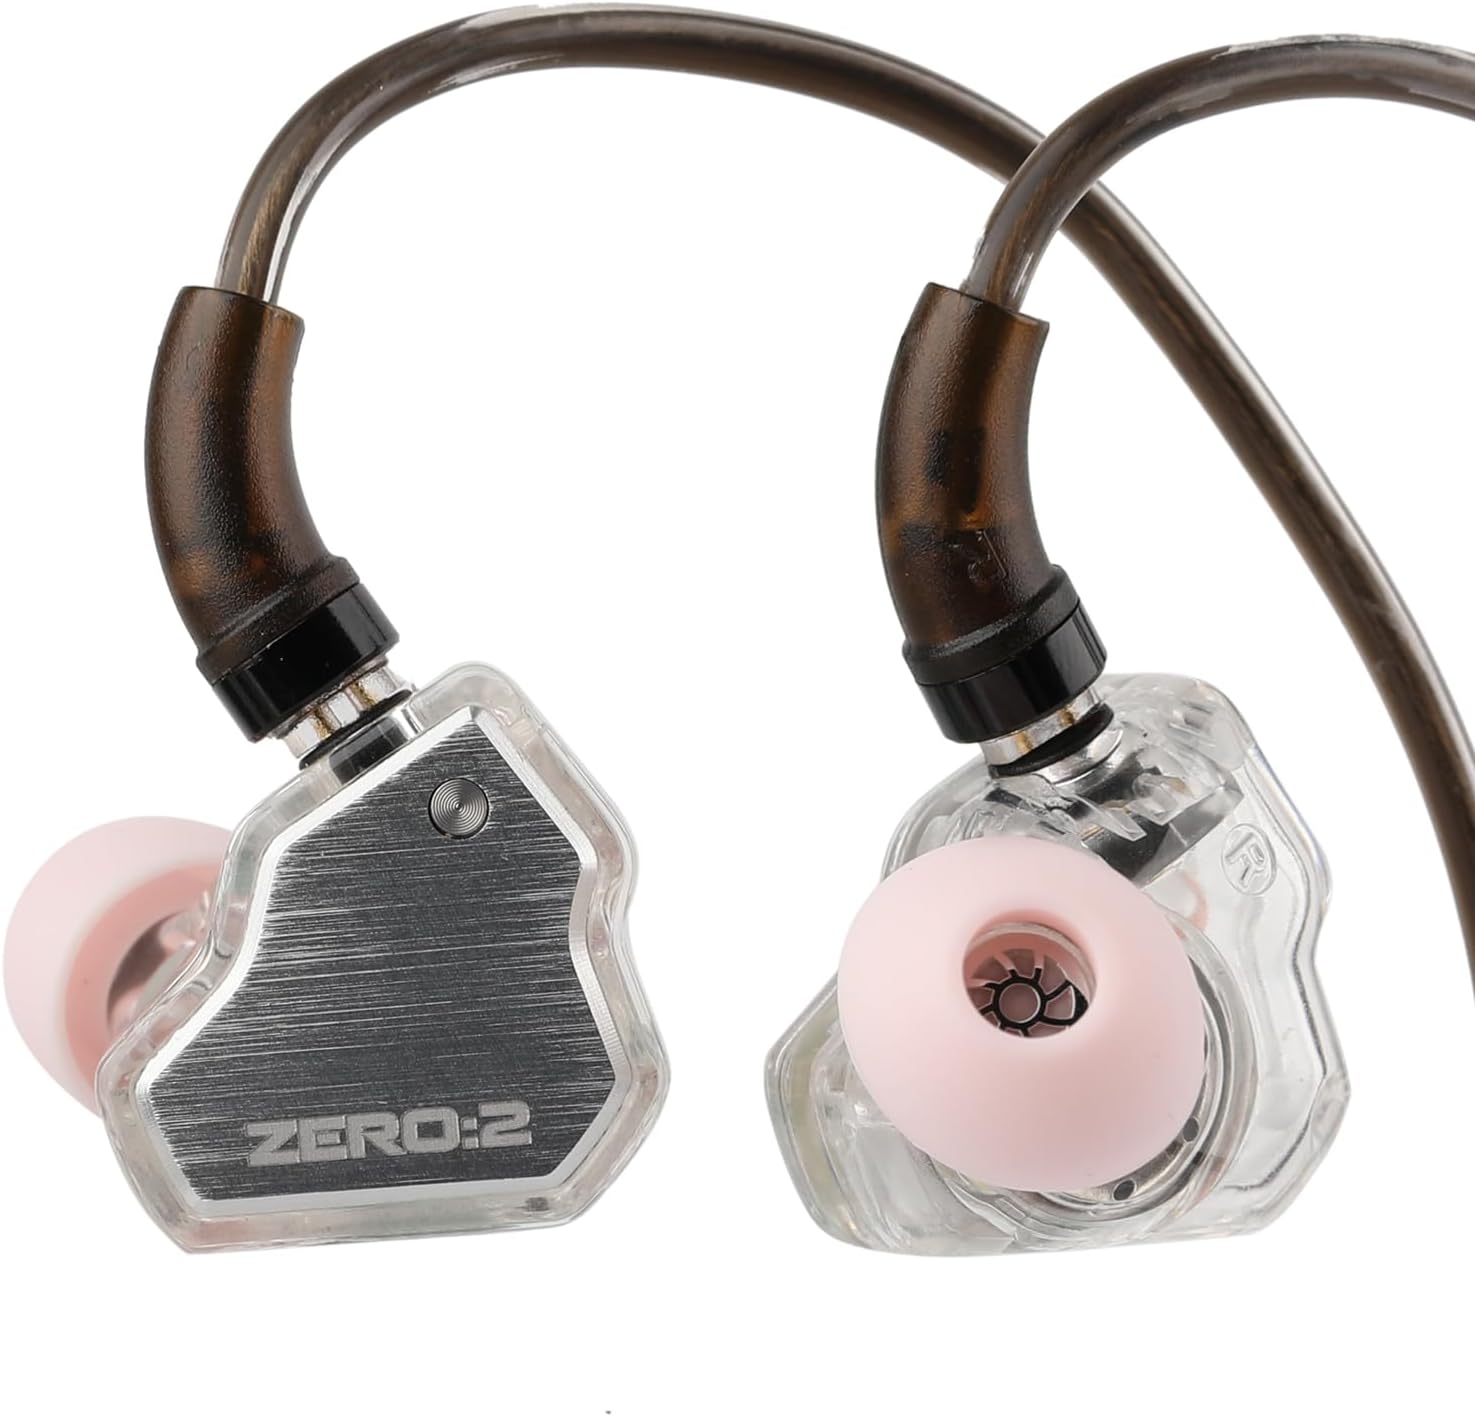 Linsoul 7Hz x Crinacle Zero:2 in Ear Monitor, Updated 10mm Dynamic Driver IEM, Wired Earbuds Earphones, Gaming Earbuds, with OFC IEM Cable for Musician (Silver)